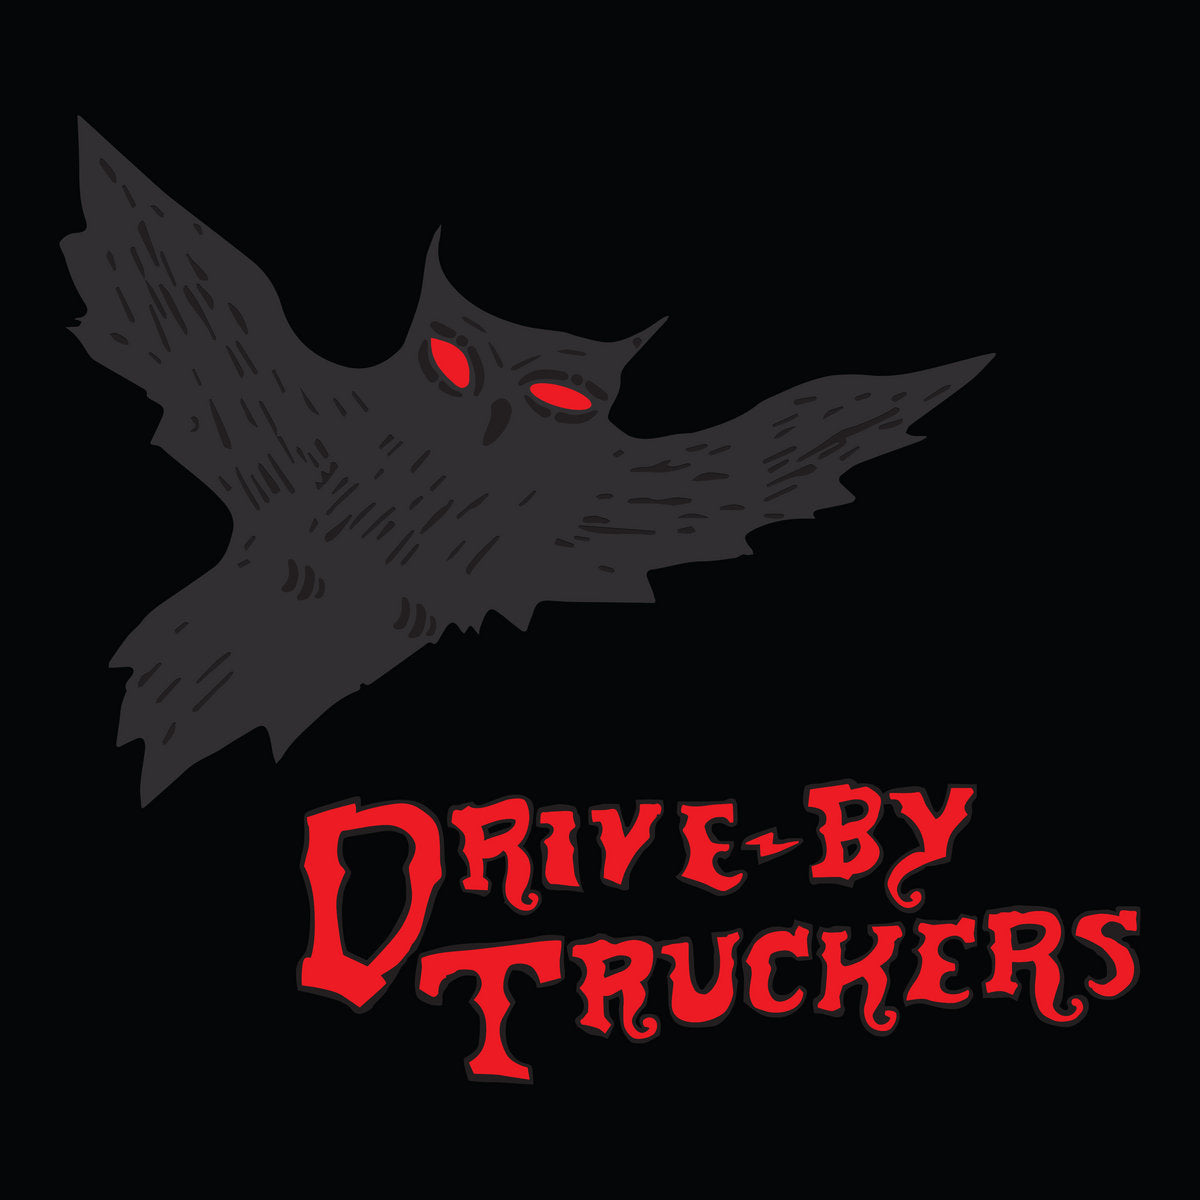 DRIVE-BY TRUCKERS - Southern Rock Opera: Deluxe Edition - 3LP Boxset - Clear Vinyl [JUL 26]